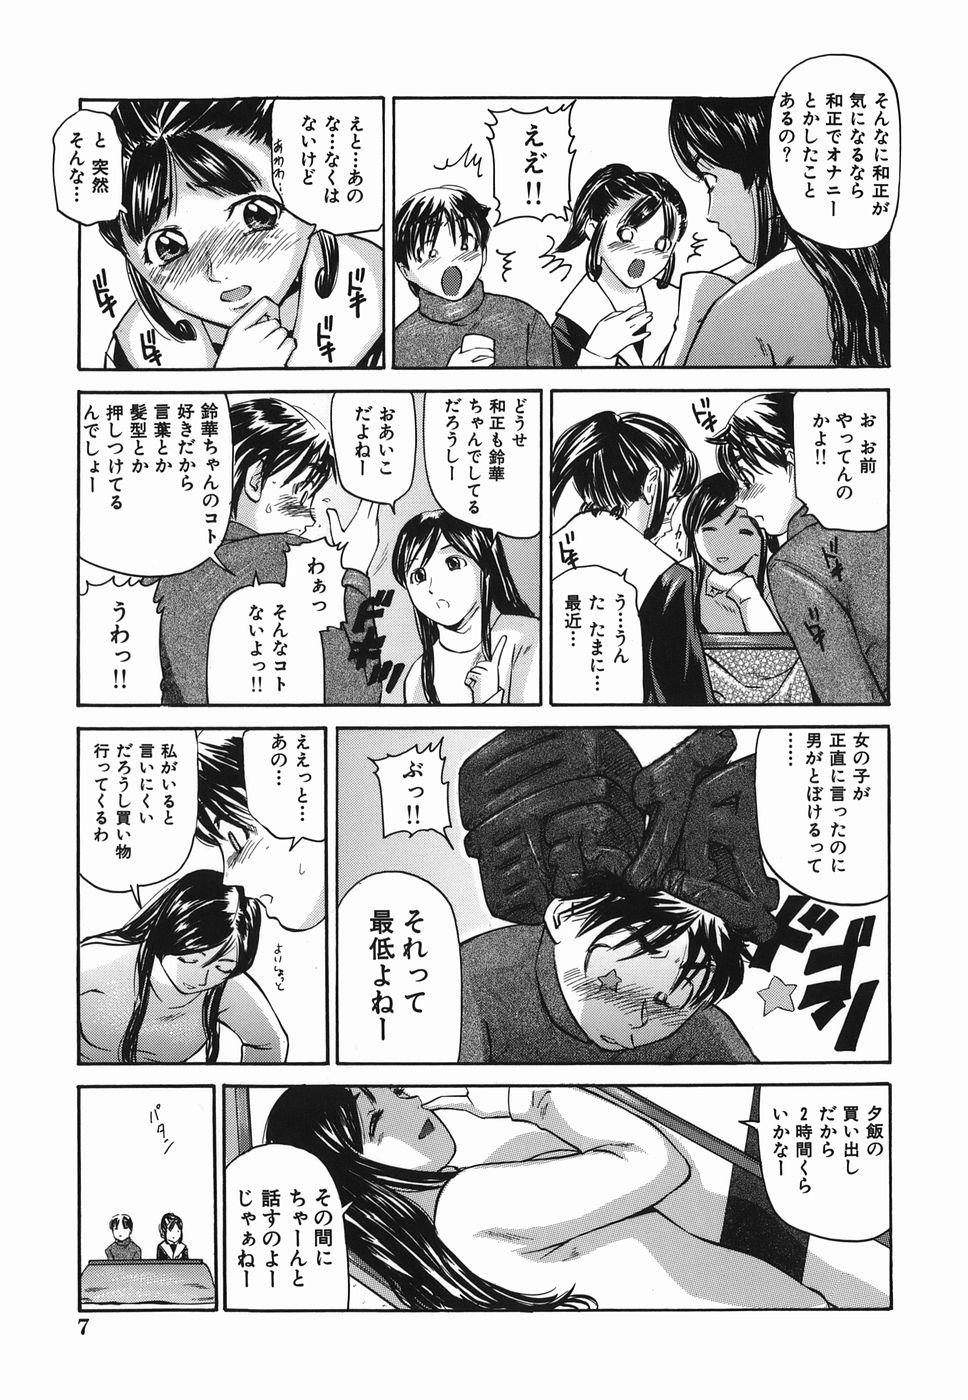 Male Zutto Issho - I would like to be directly together! Penetration - Page 7